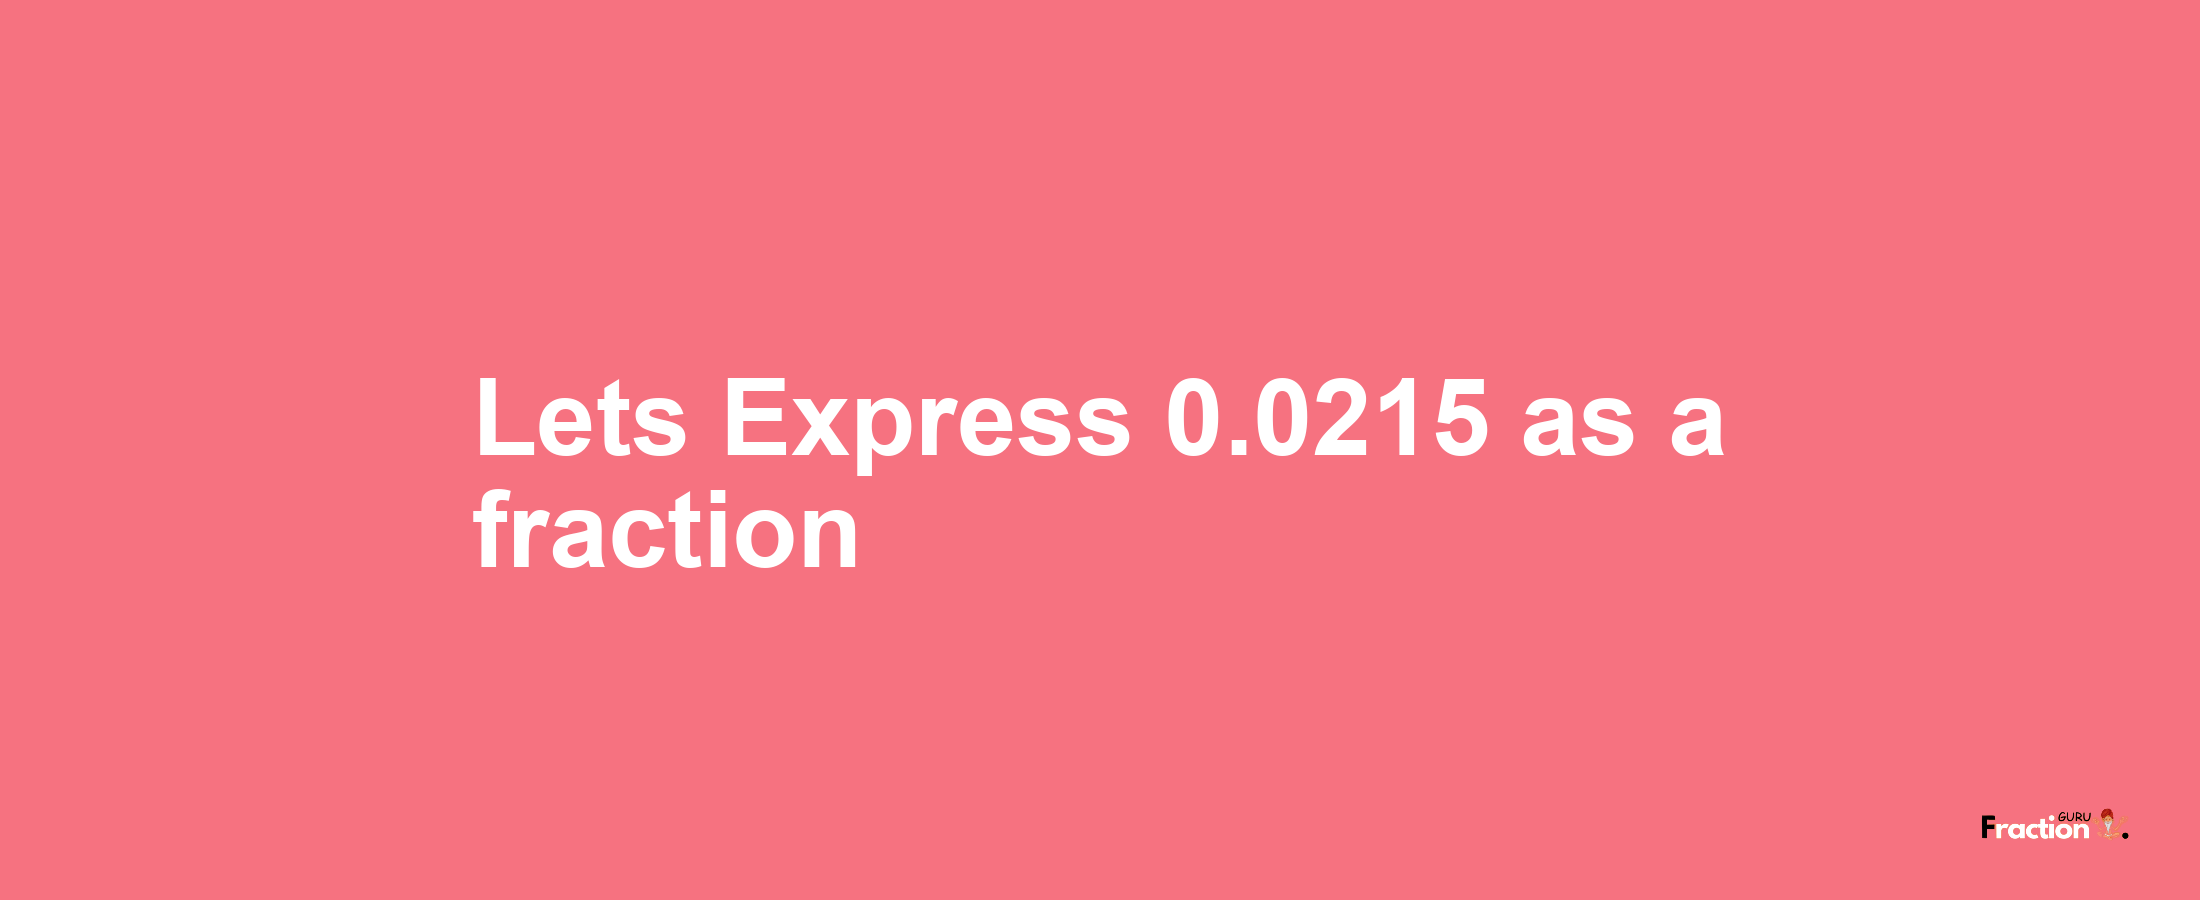 Lets Express 0.0215 as afraction